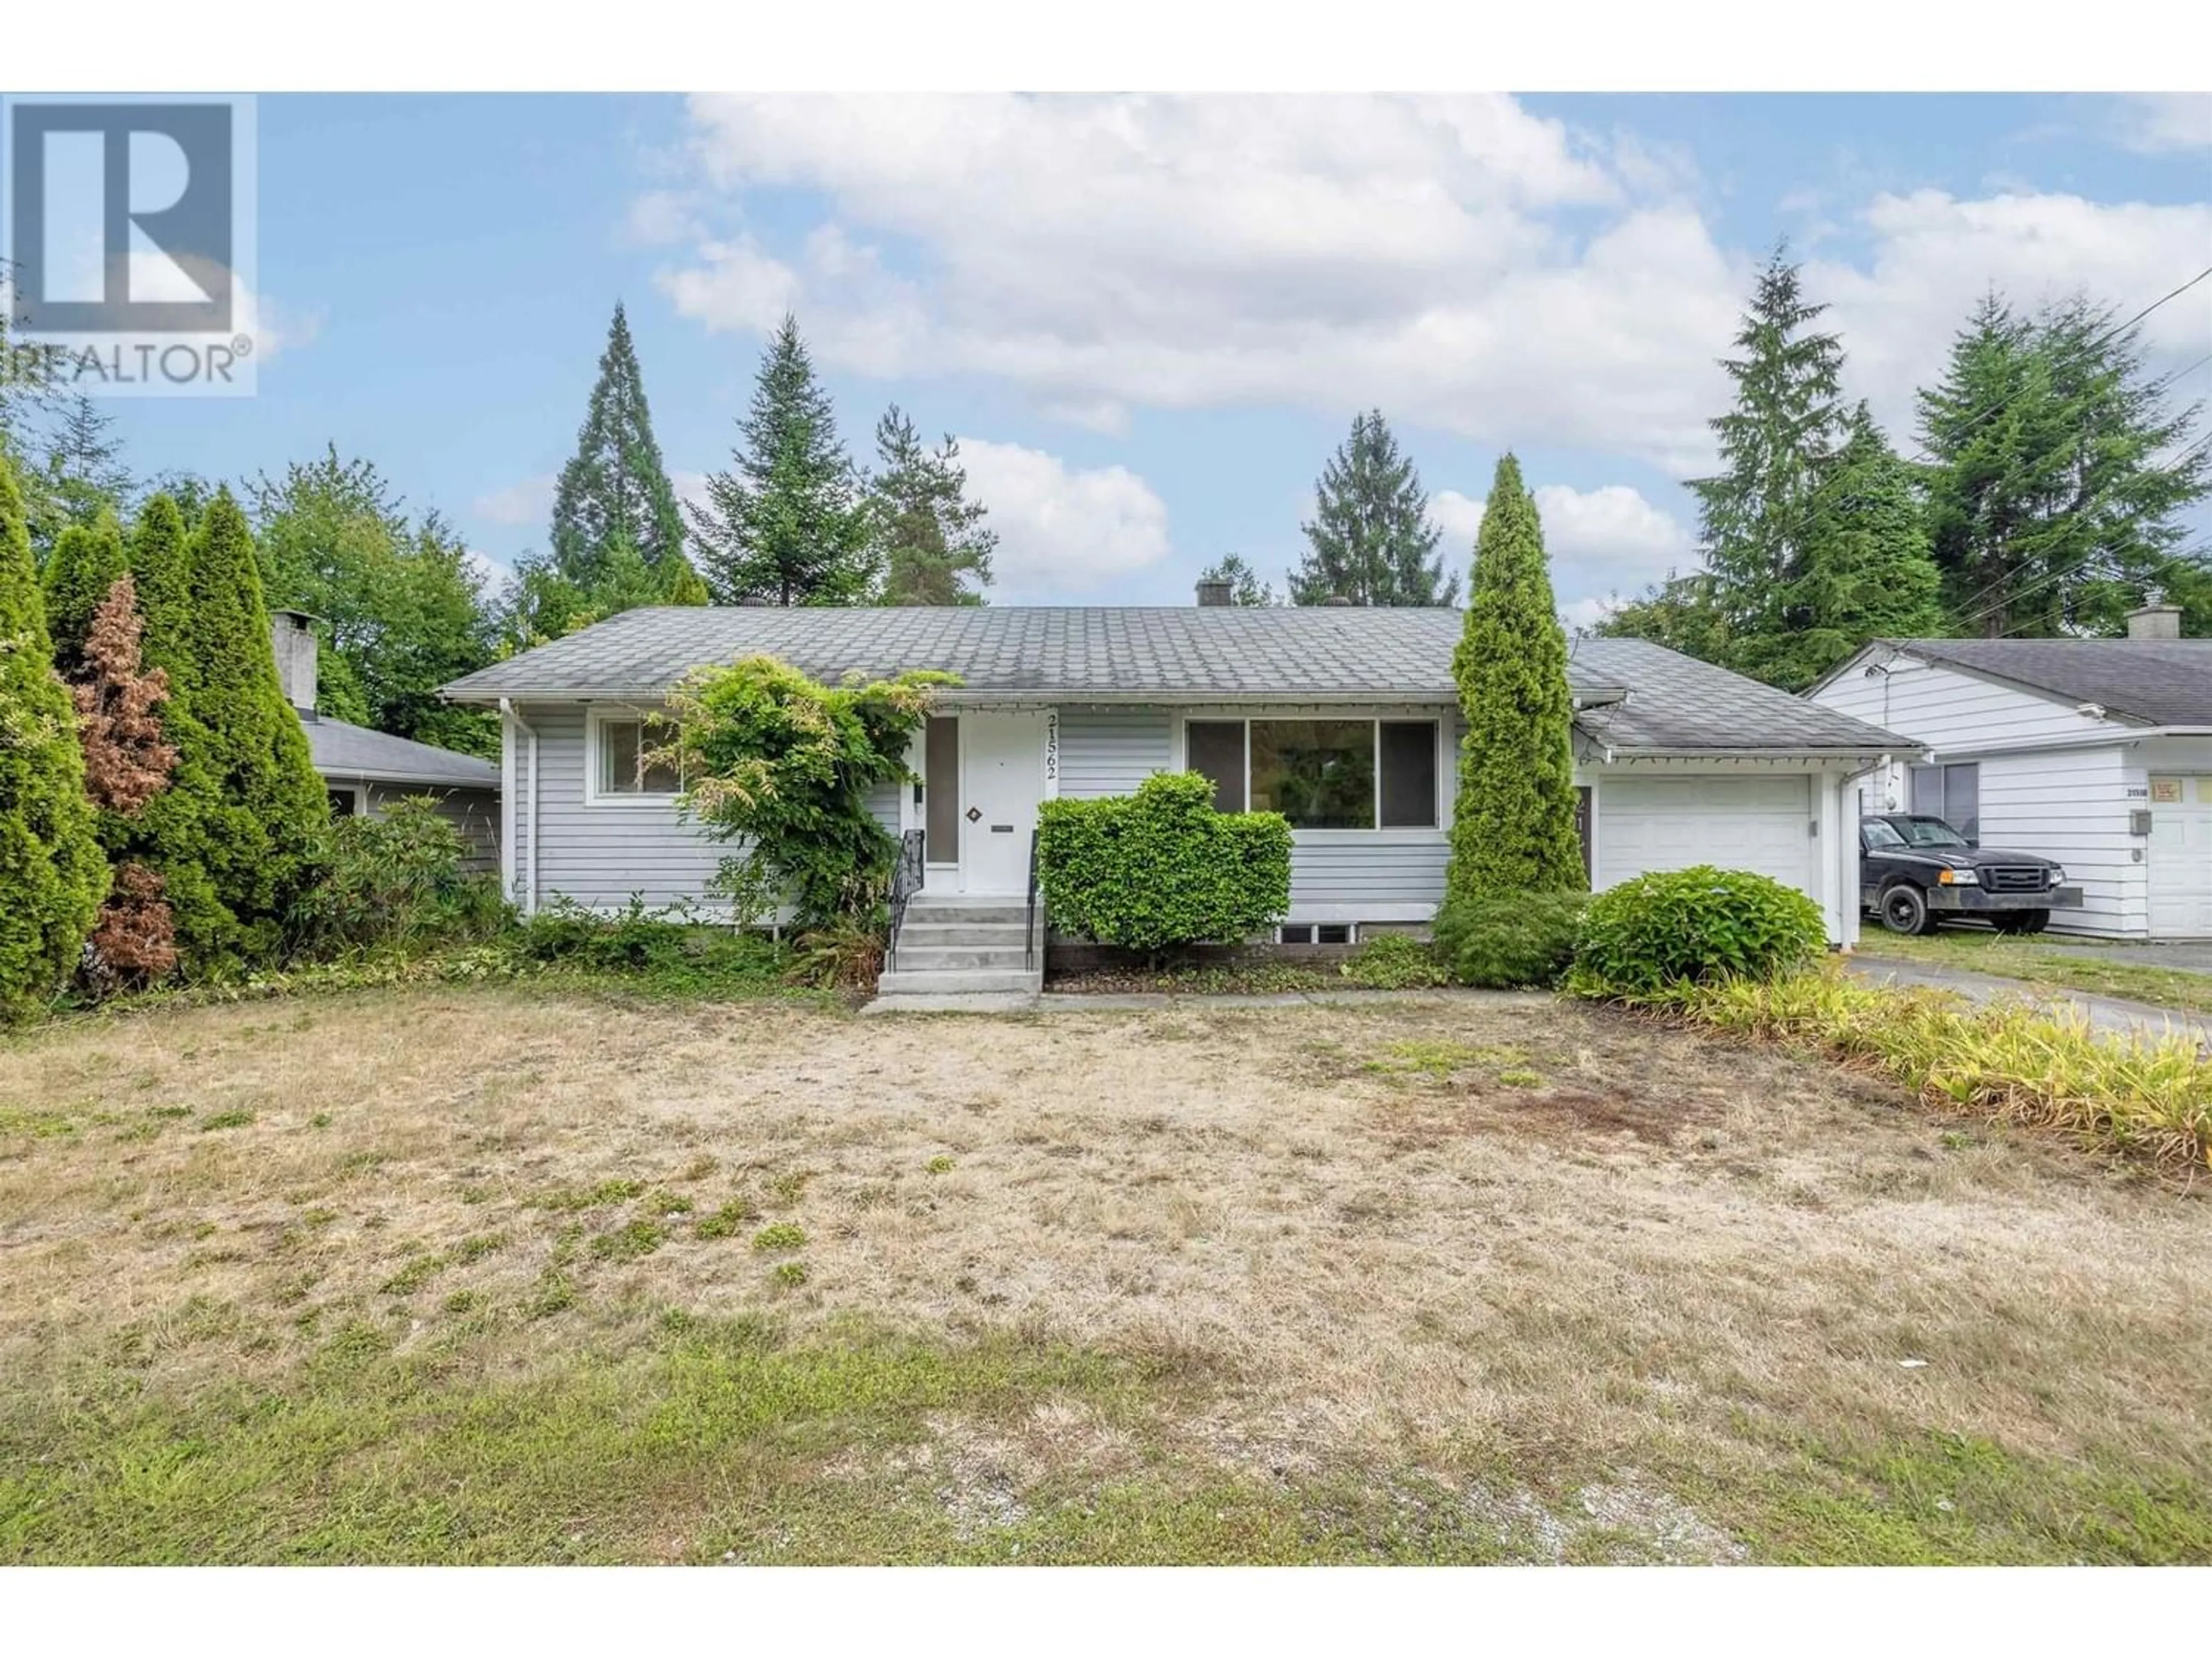 Frontside or backside of a home for 21562 123 AVENUE, Maple Ridge British Columbia V2X4C2